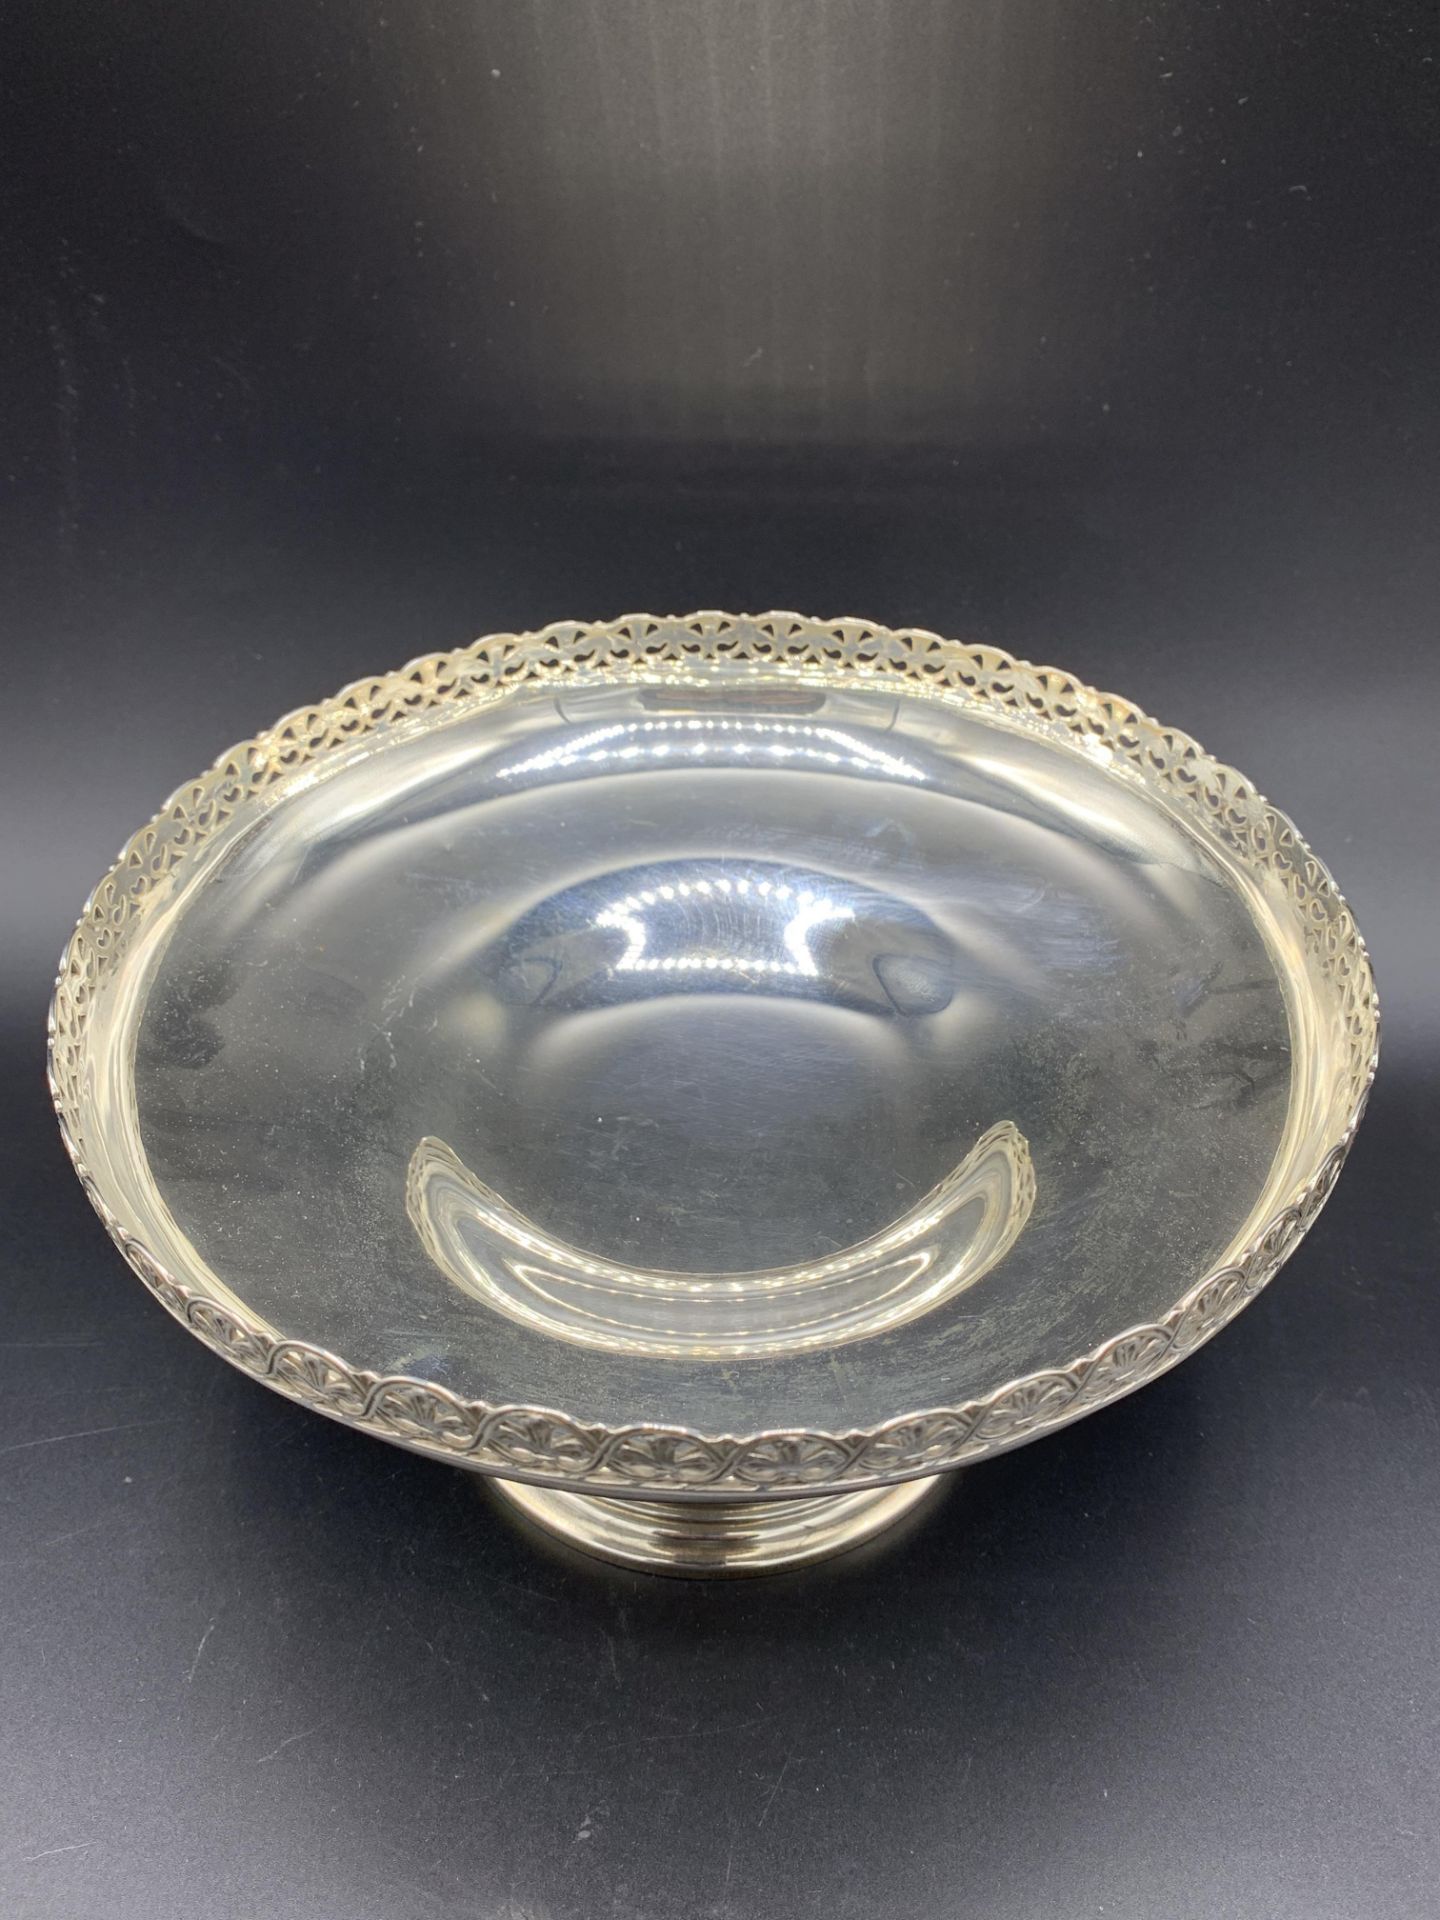 Mappin & Webb silver dish, 1926 - Image 4 of 4